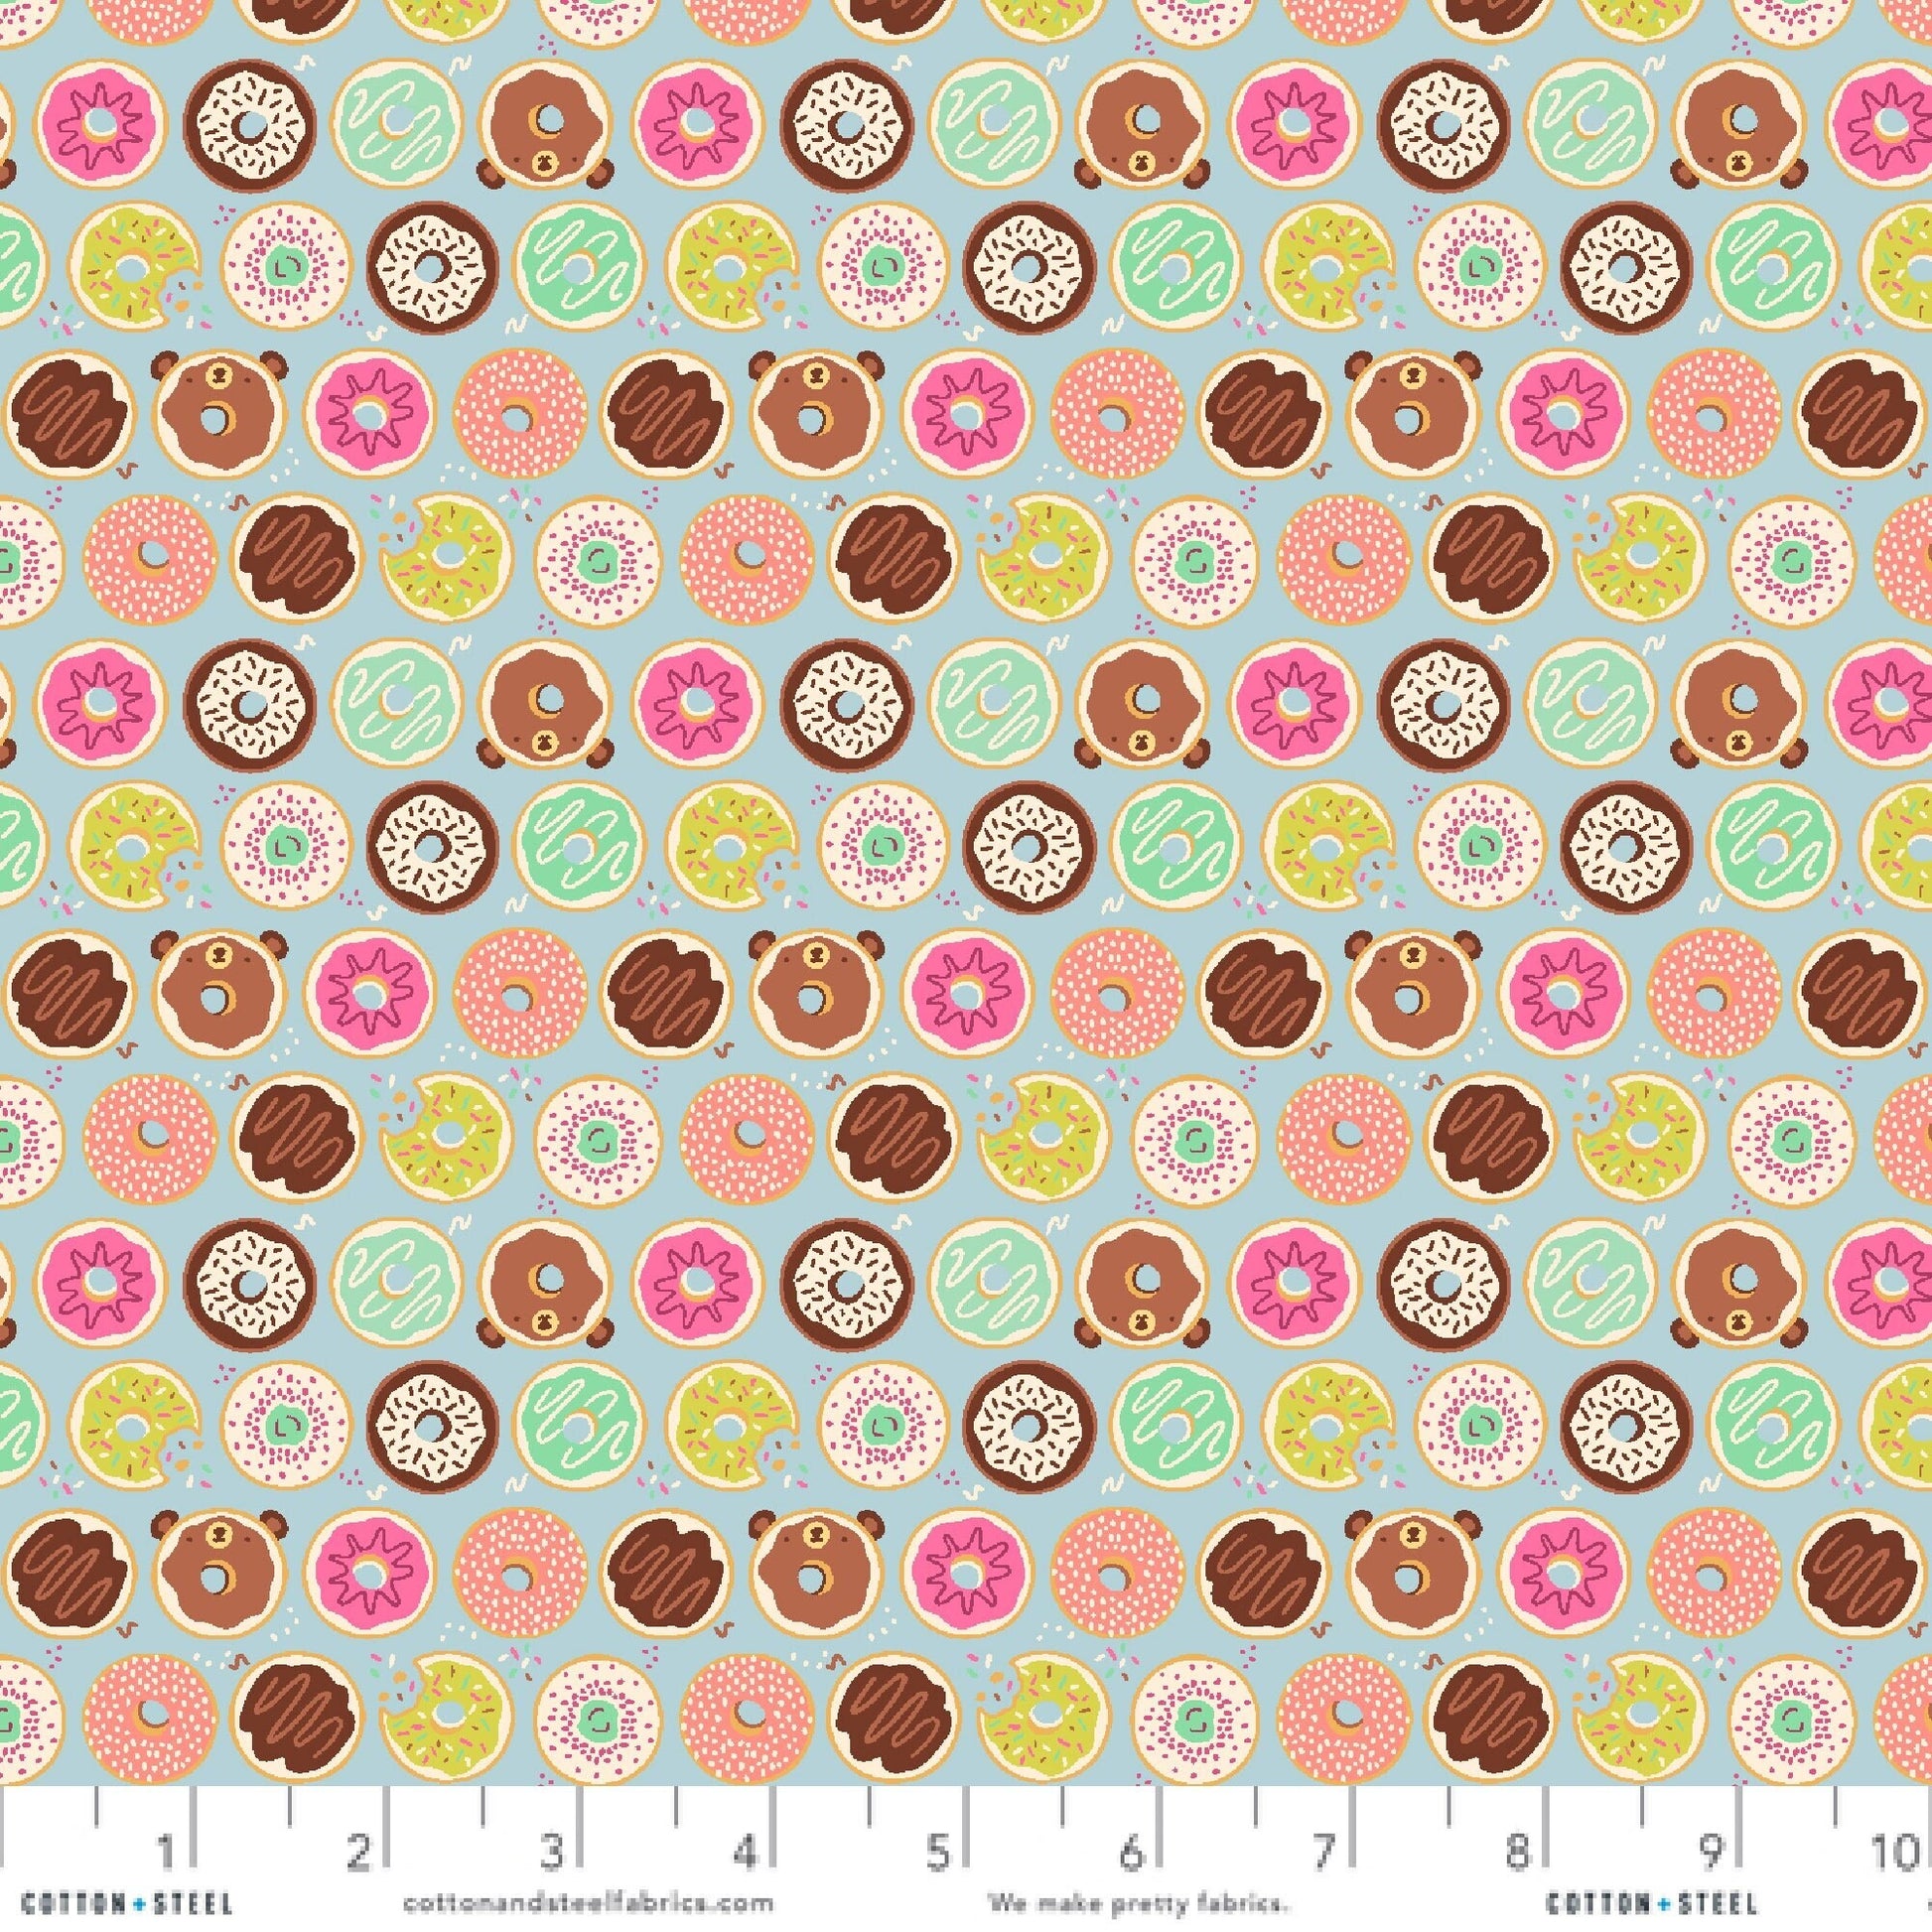 Doughlightful Favorite Color is Rainbow Mini Market Beth Gray Cotton + Steel Quilters Cotton Nostalgic Donuts Fabric Fetish